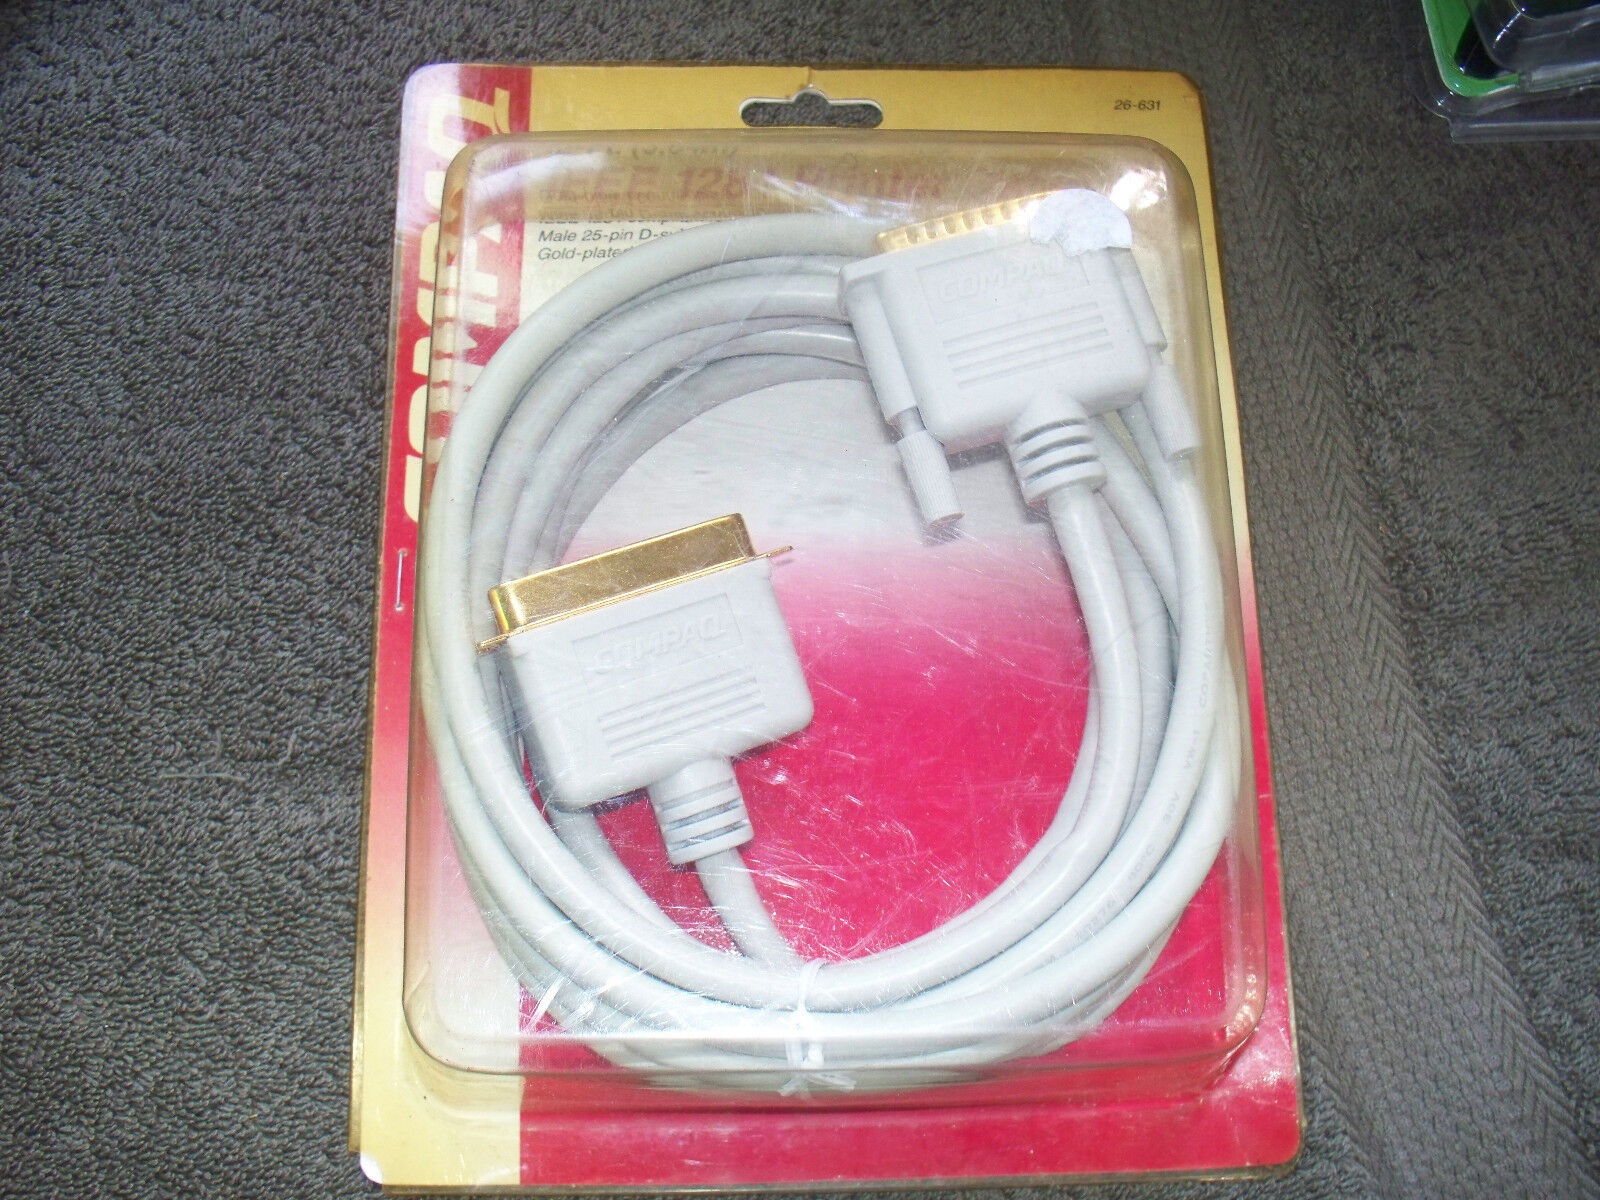 NIP - Compaq 26-631 IEEE 1284 Printer cable 12ft Gold Plated 2 Way Data Transfer